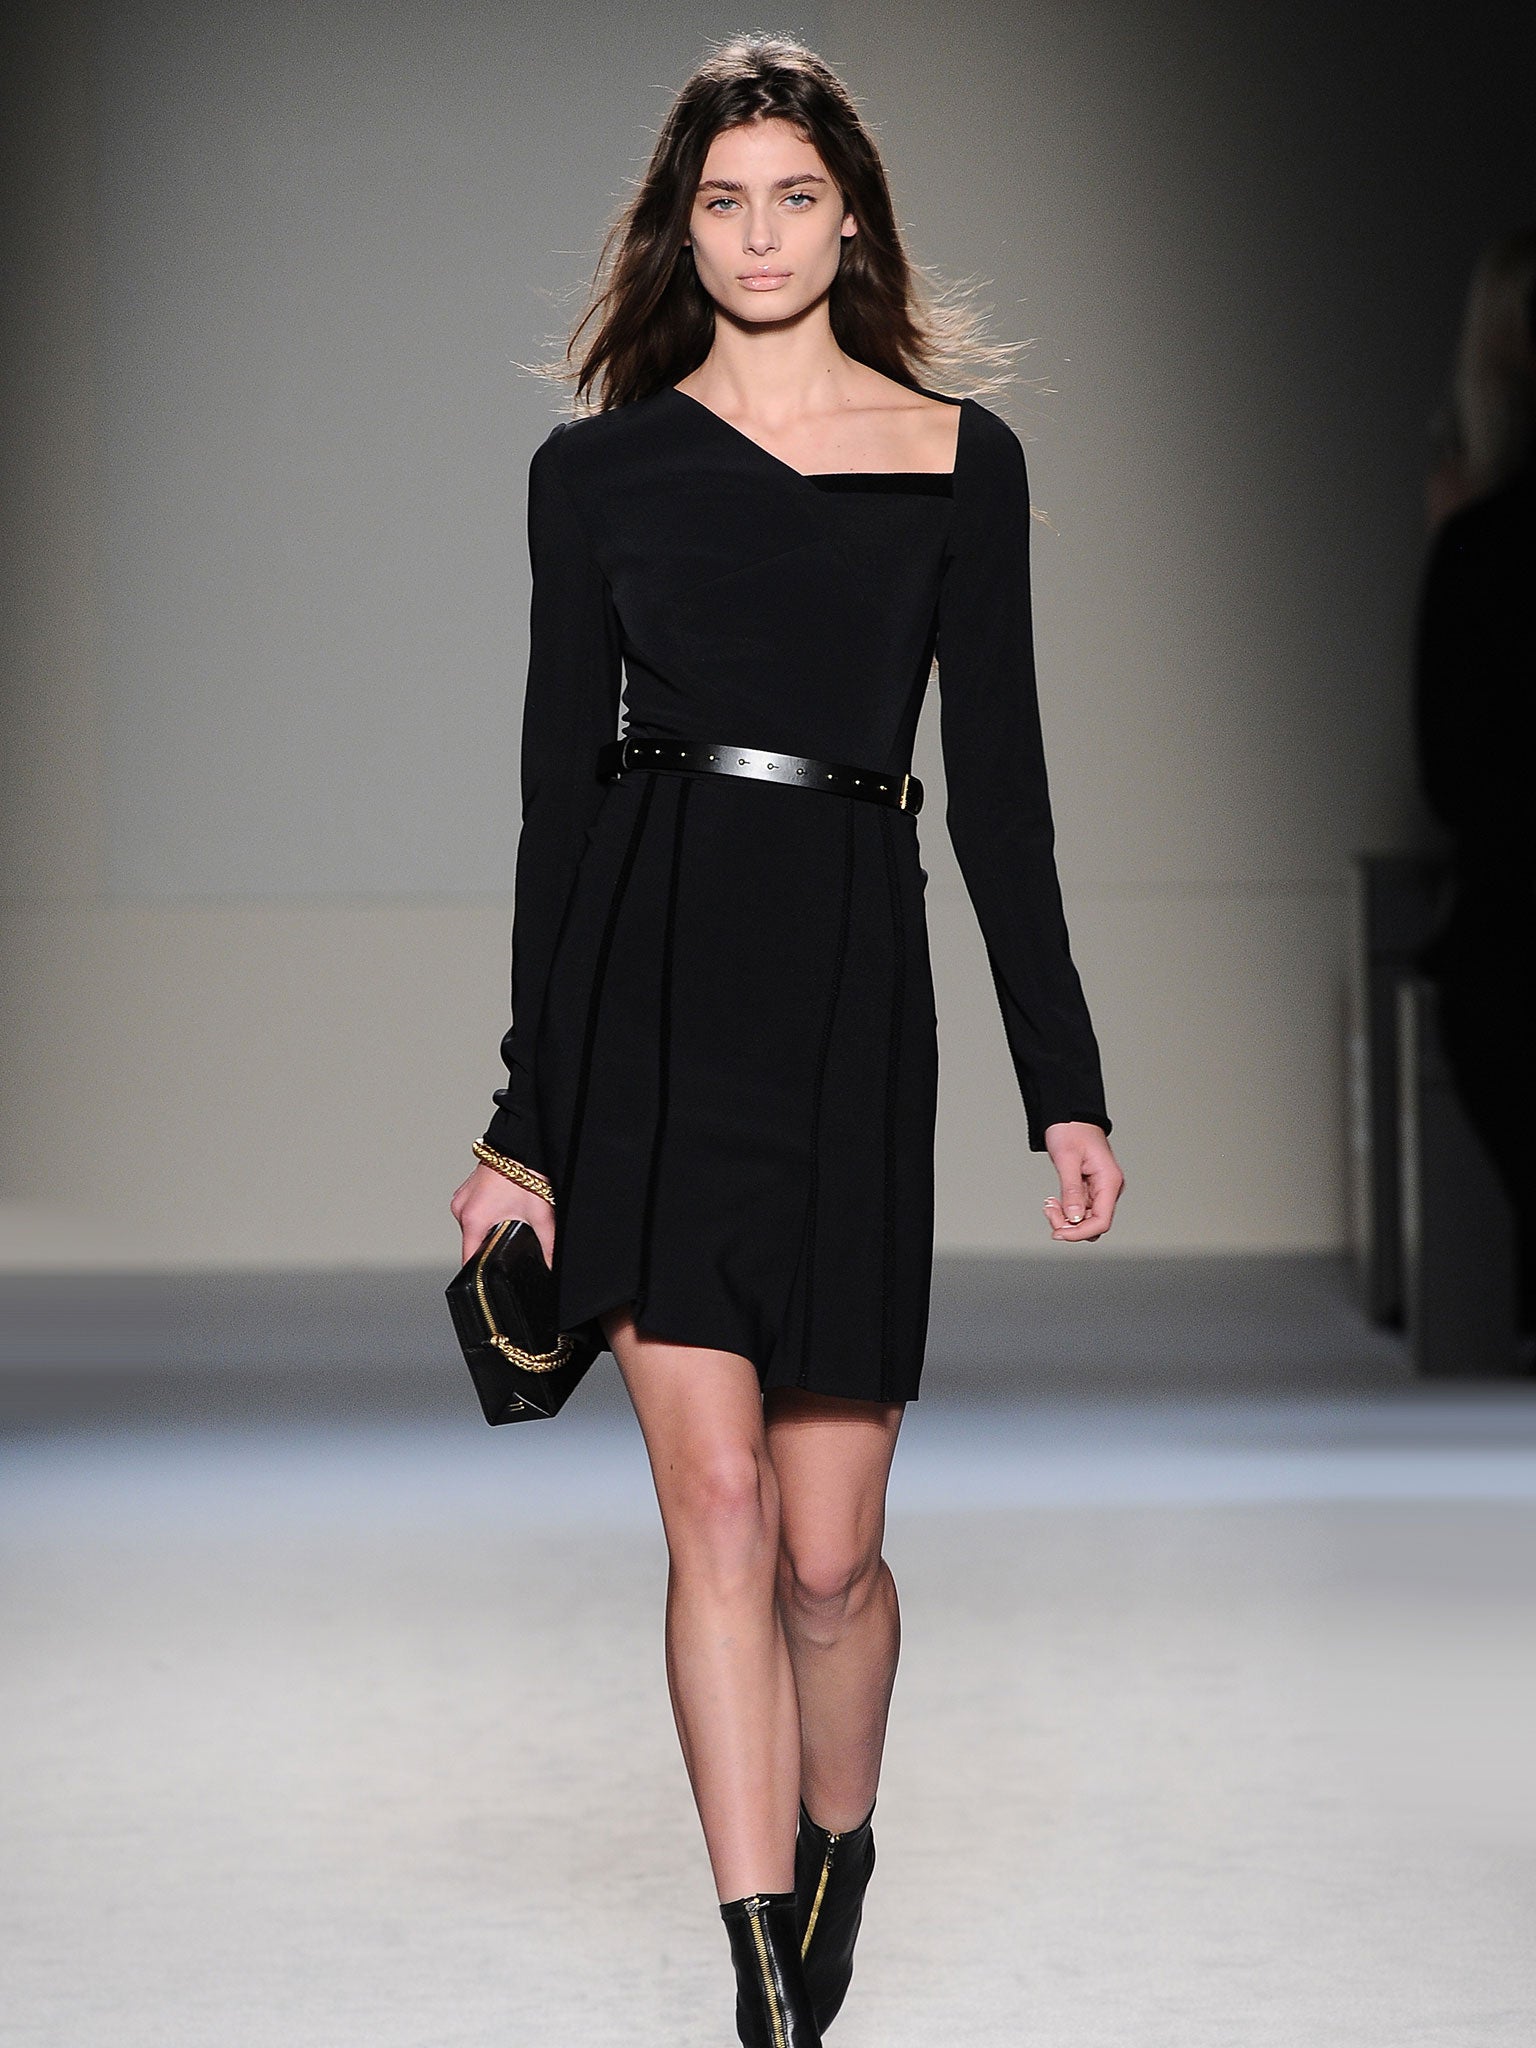 A look from Roland Mouret's autumn/winter 2015 collection